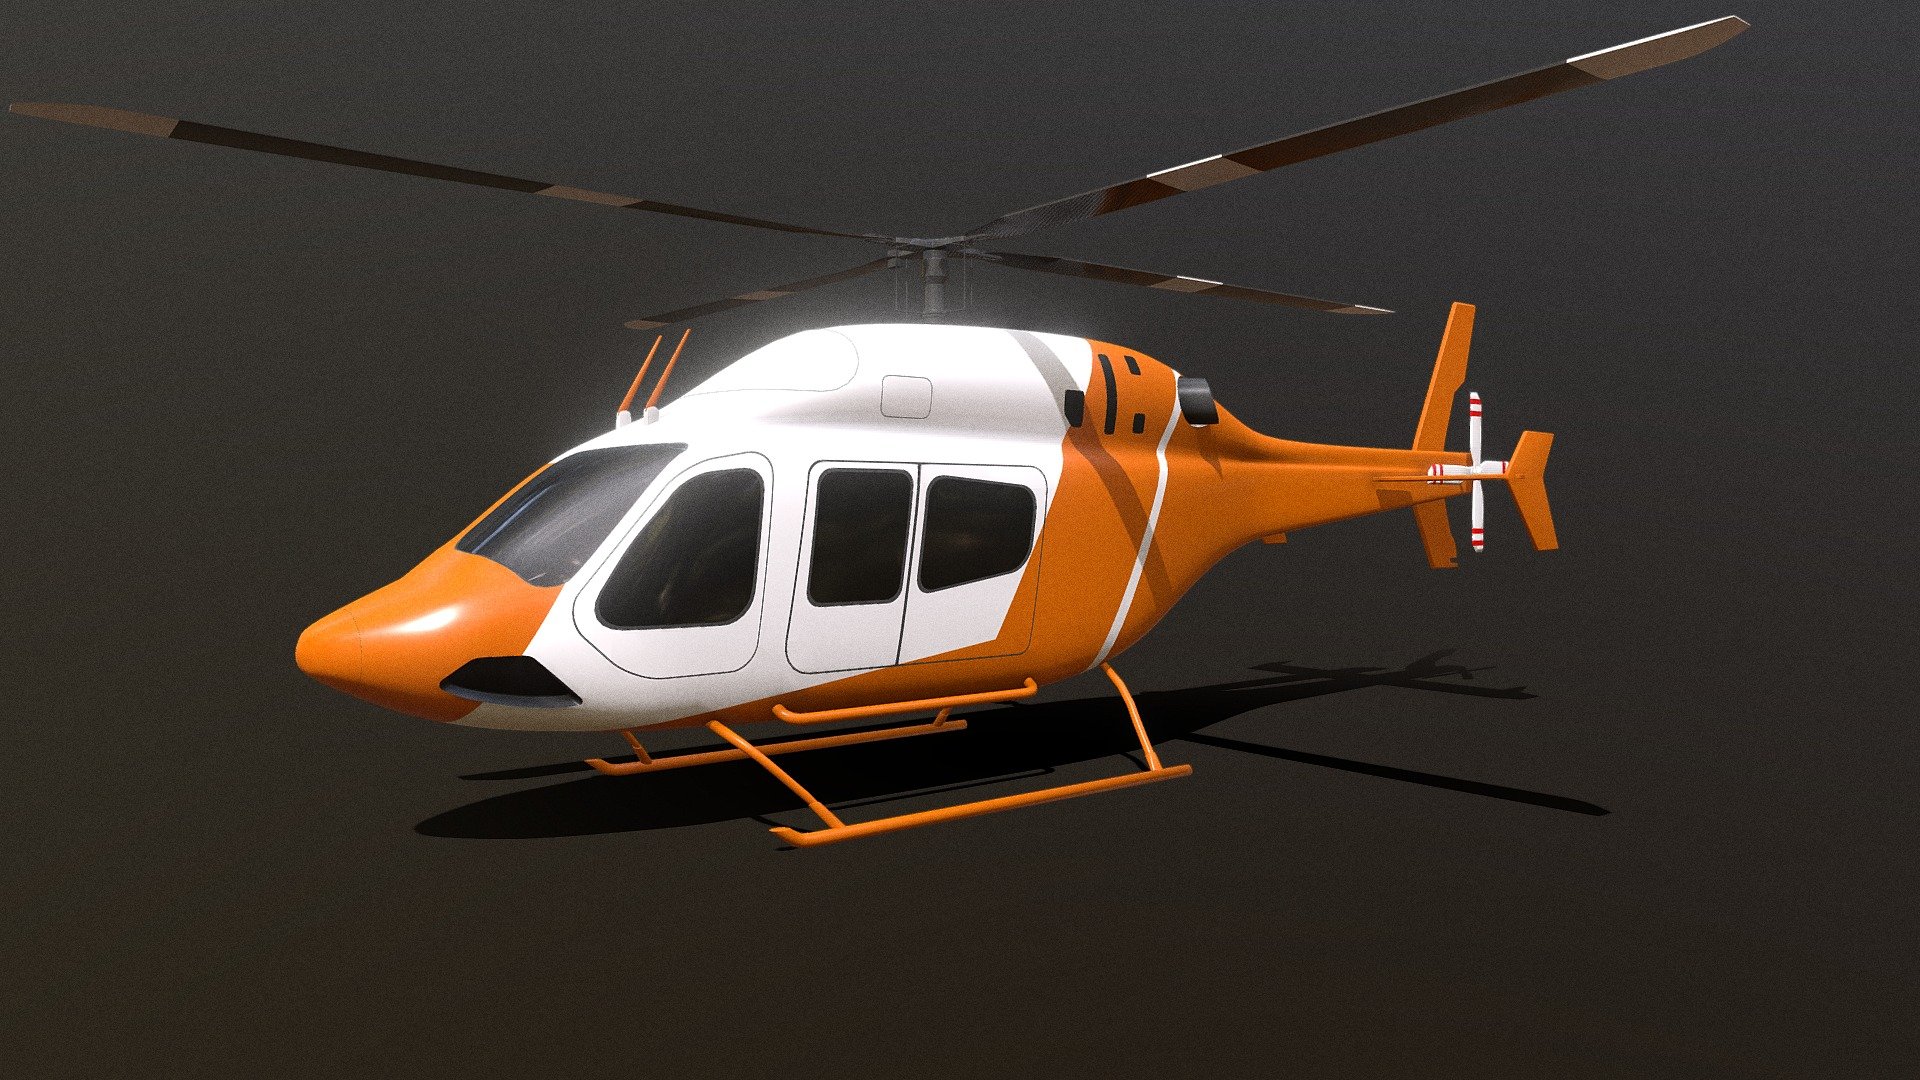 The Bell 429
(now free to download) - Bell 429 Helicopter - Download Free 3D model by agreene (@davidre) 3d model